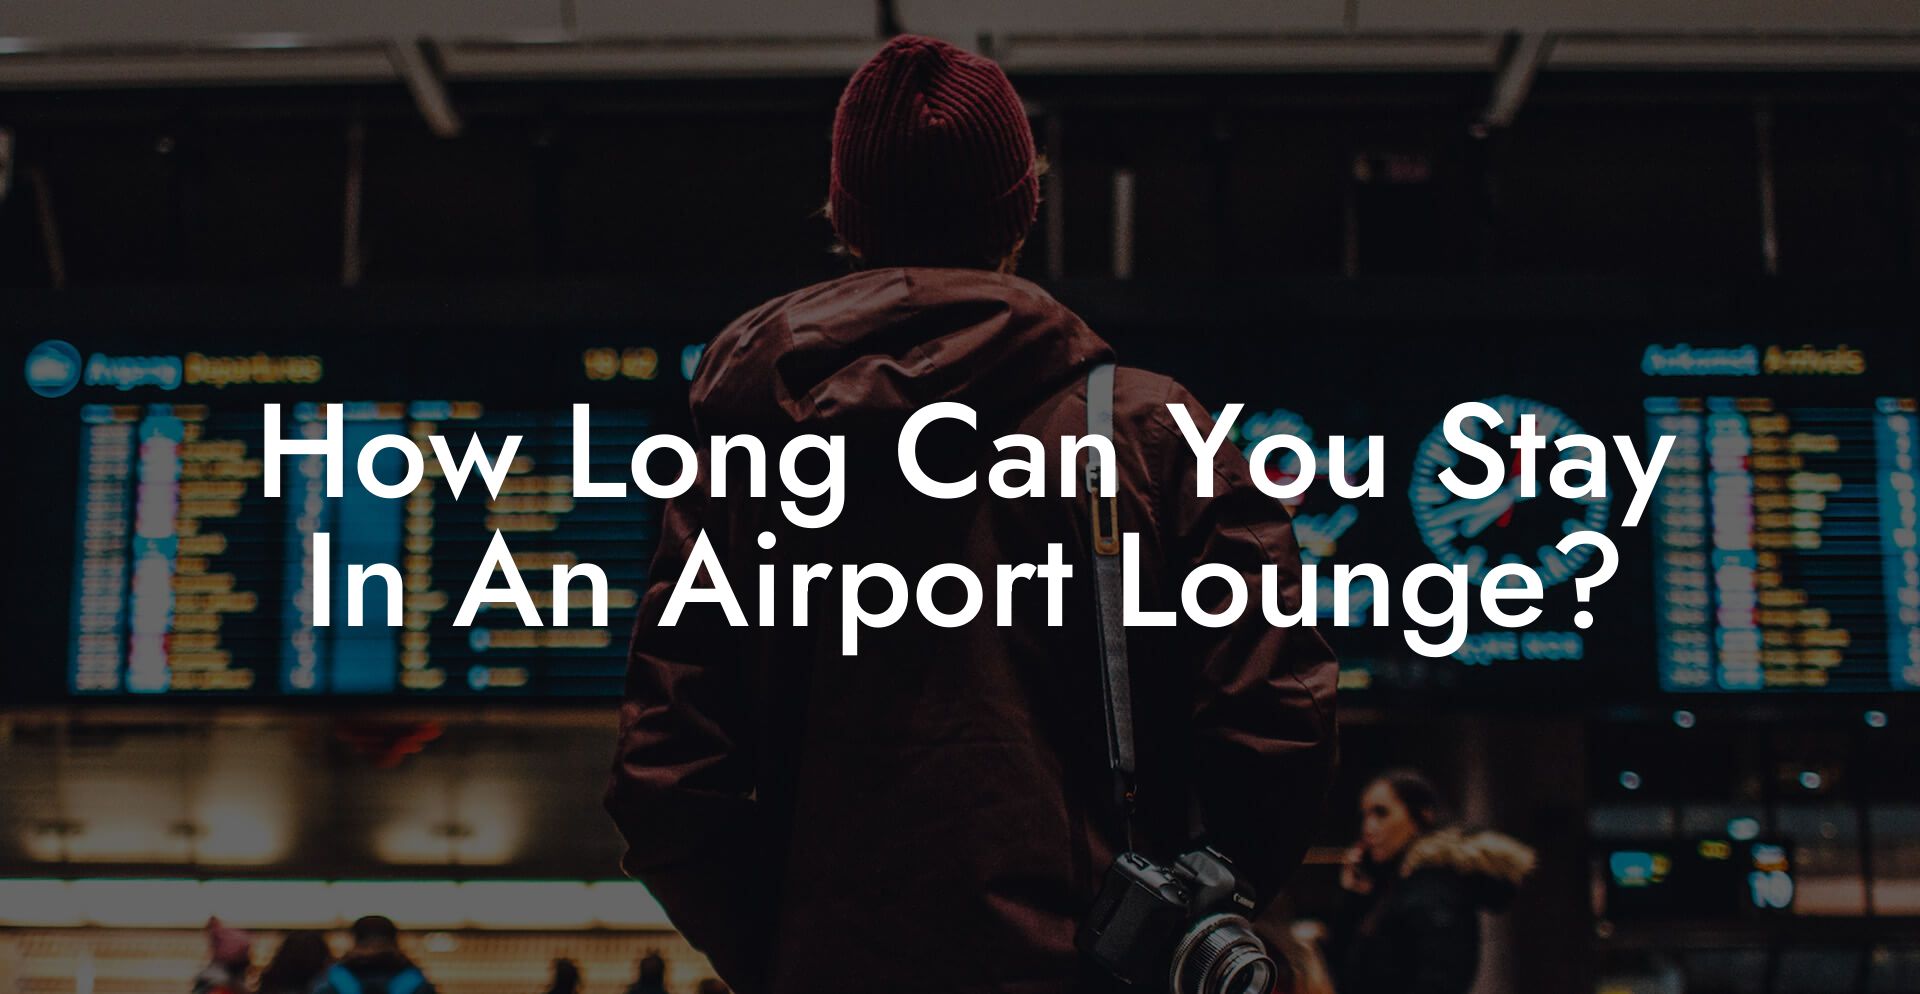 How Long Can You Stay In An Airport Lounge?